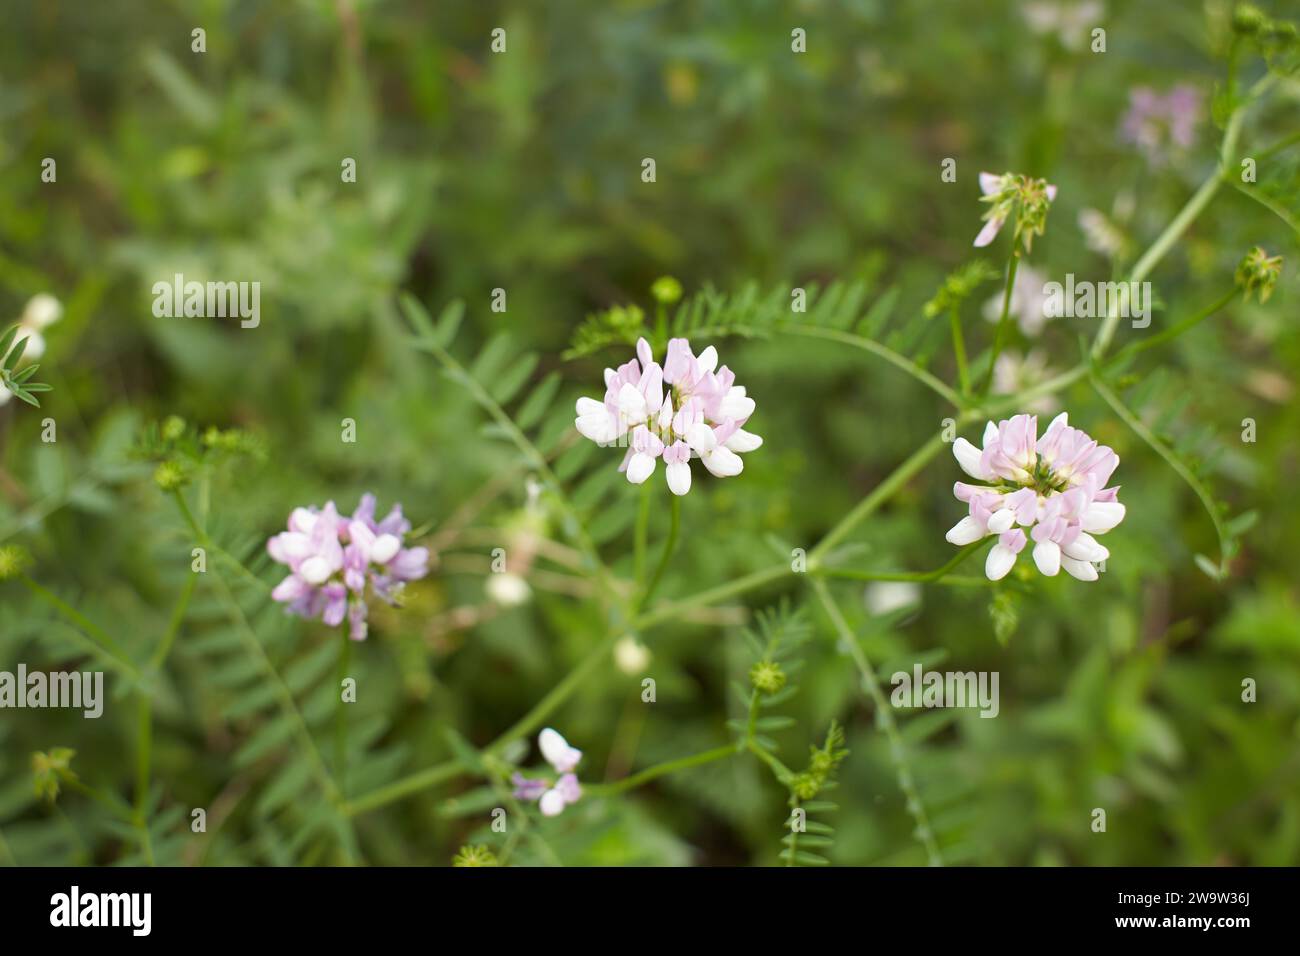 White flowers of Crownvetch in the garden. Summer and spring time. Stock Photo